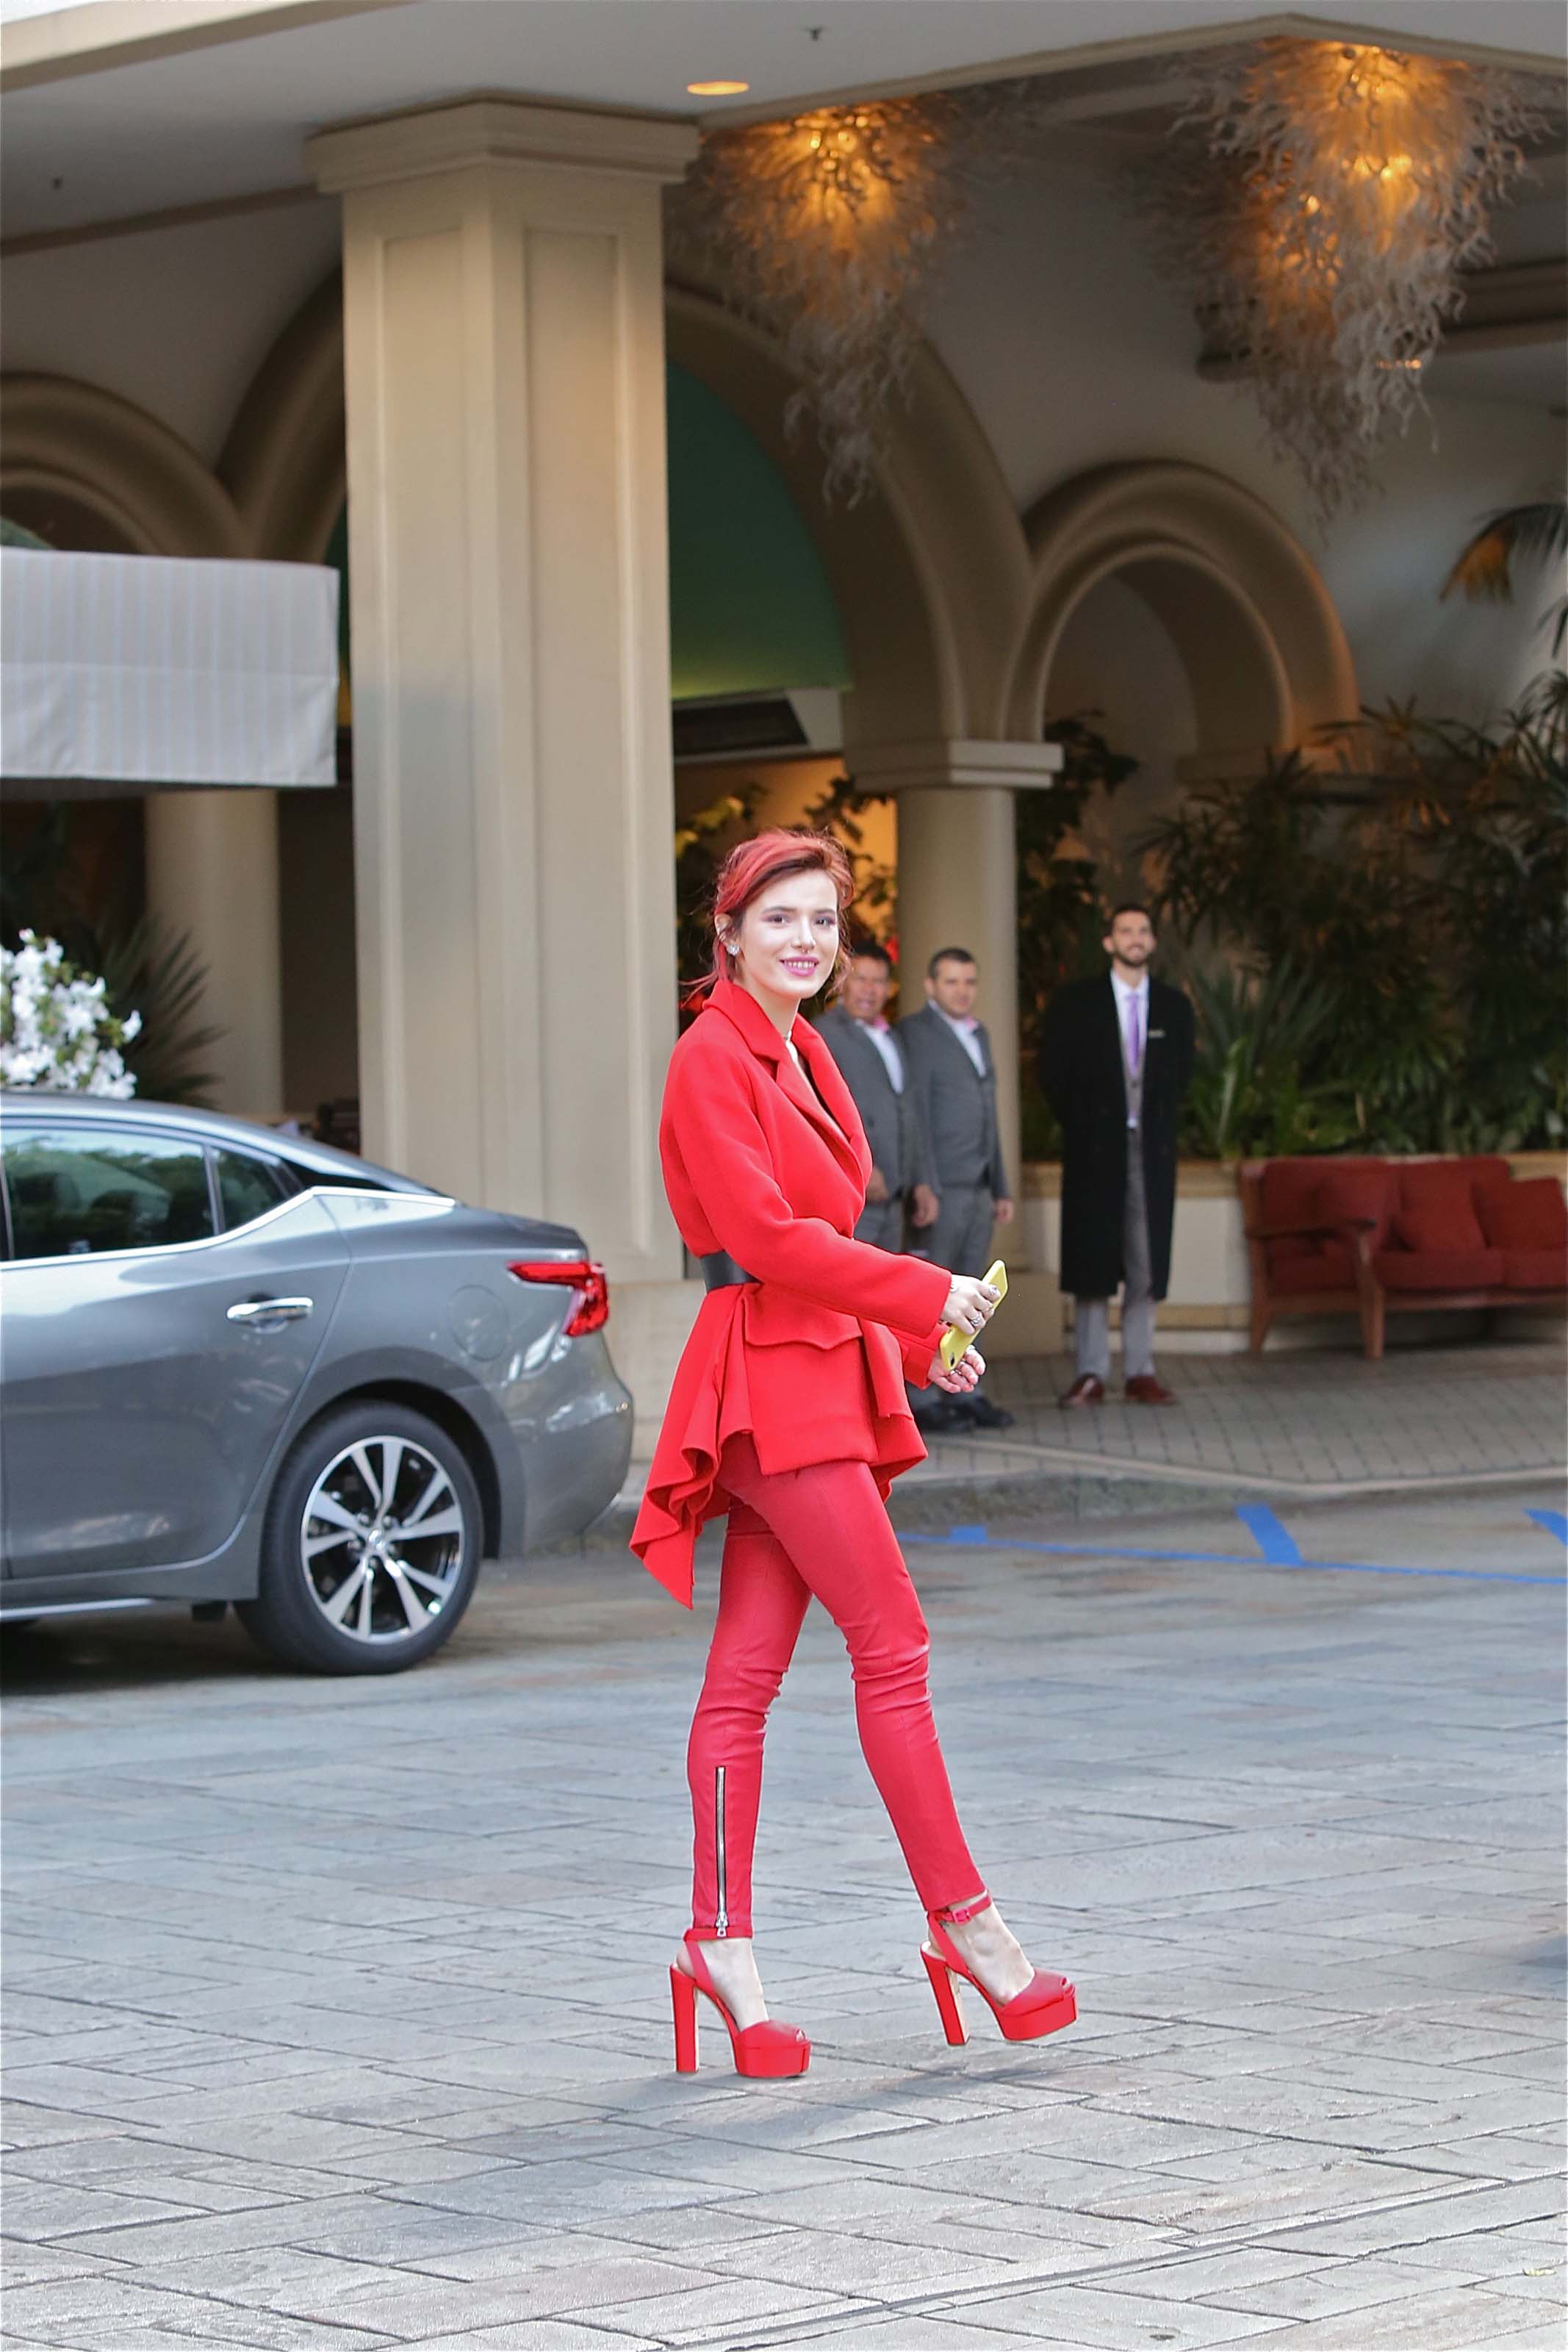 Bella Thorne at the Four seasons Hotel